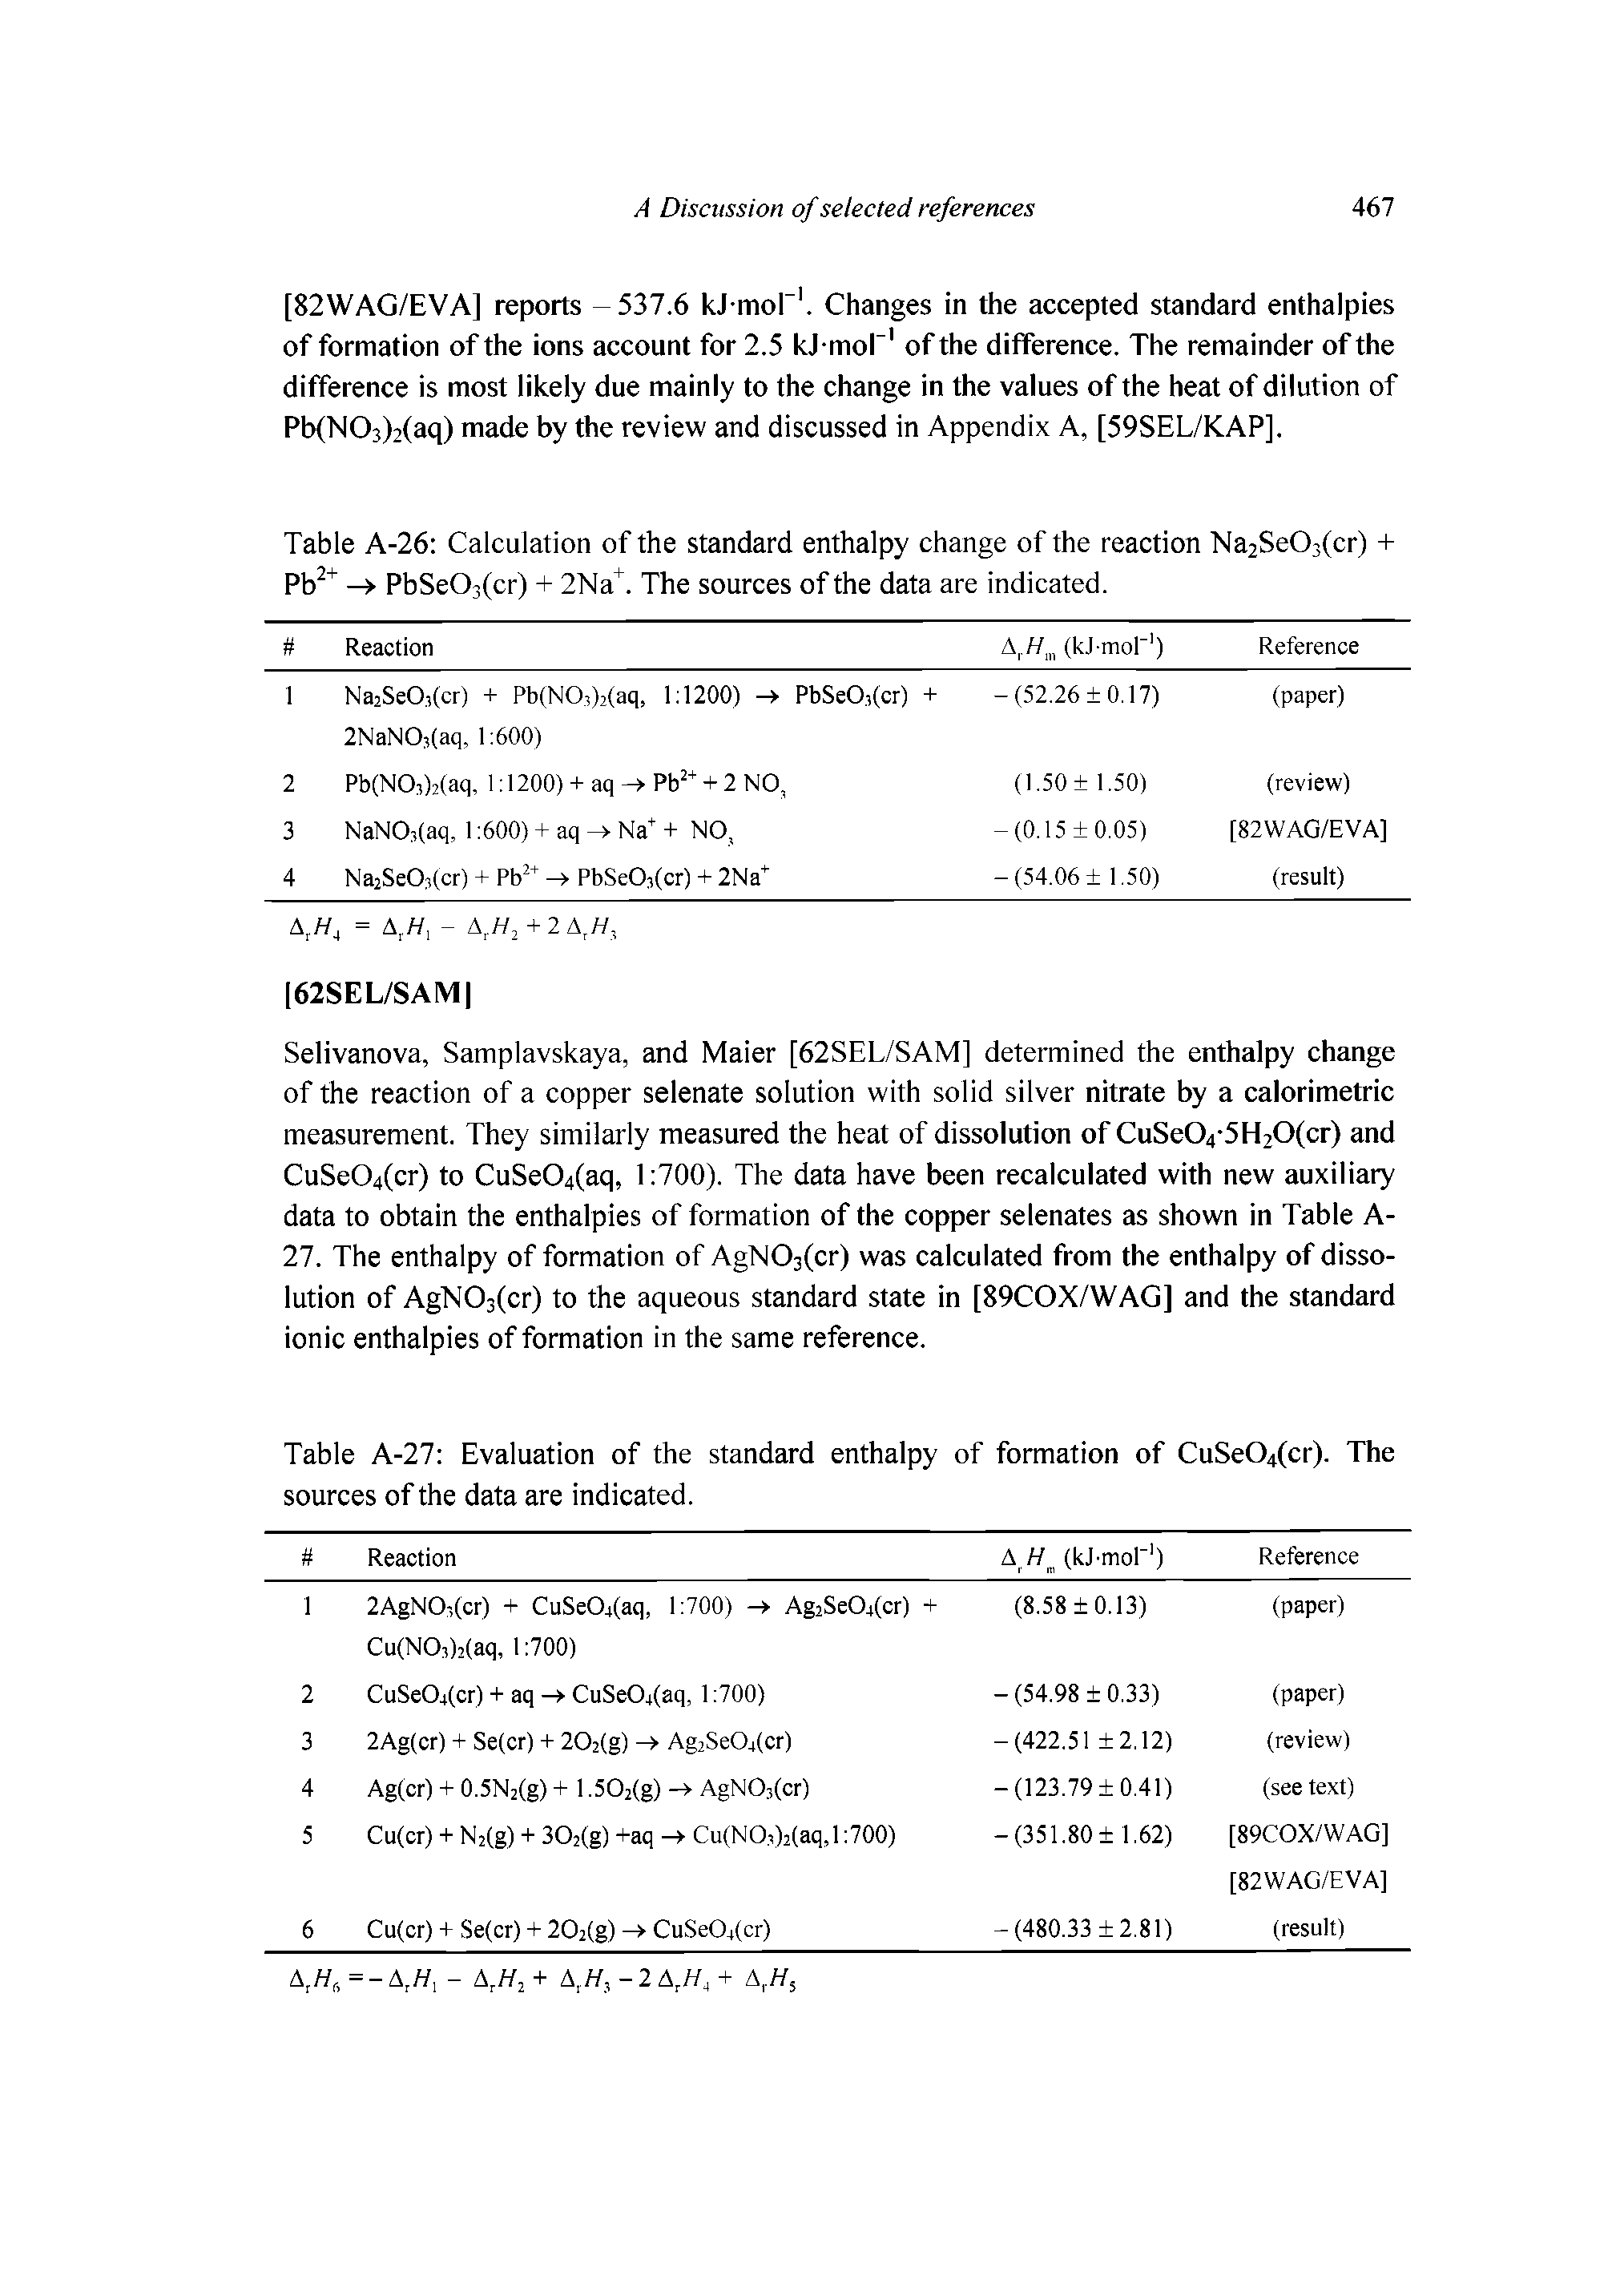 Table A-26 Calculation of the standard enthalpy change of the reaction Na2Se03(cr) Pb PbSe03(cr) + 2Na. The sources of the data are indicated.